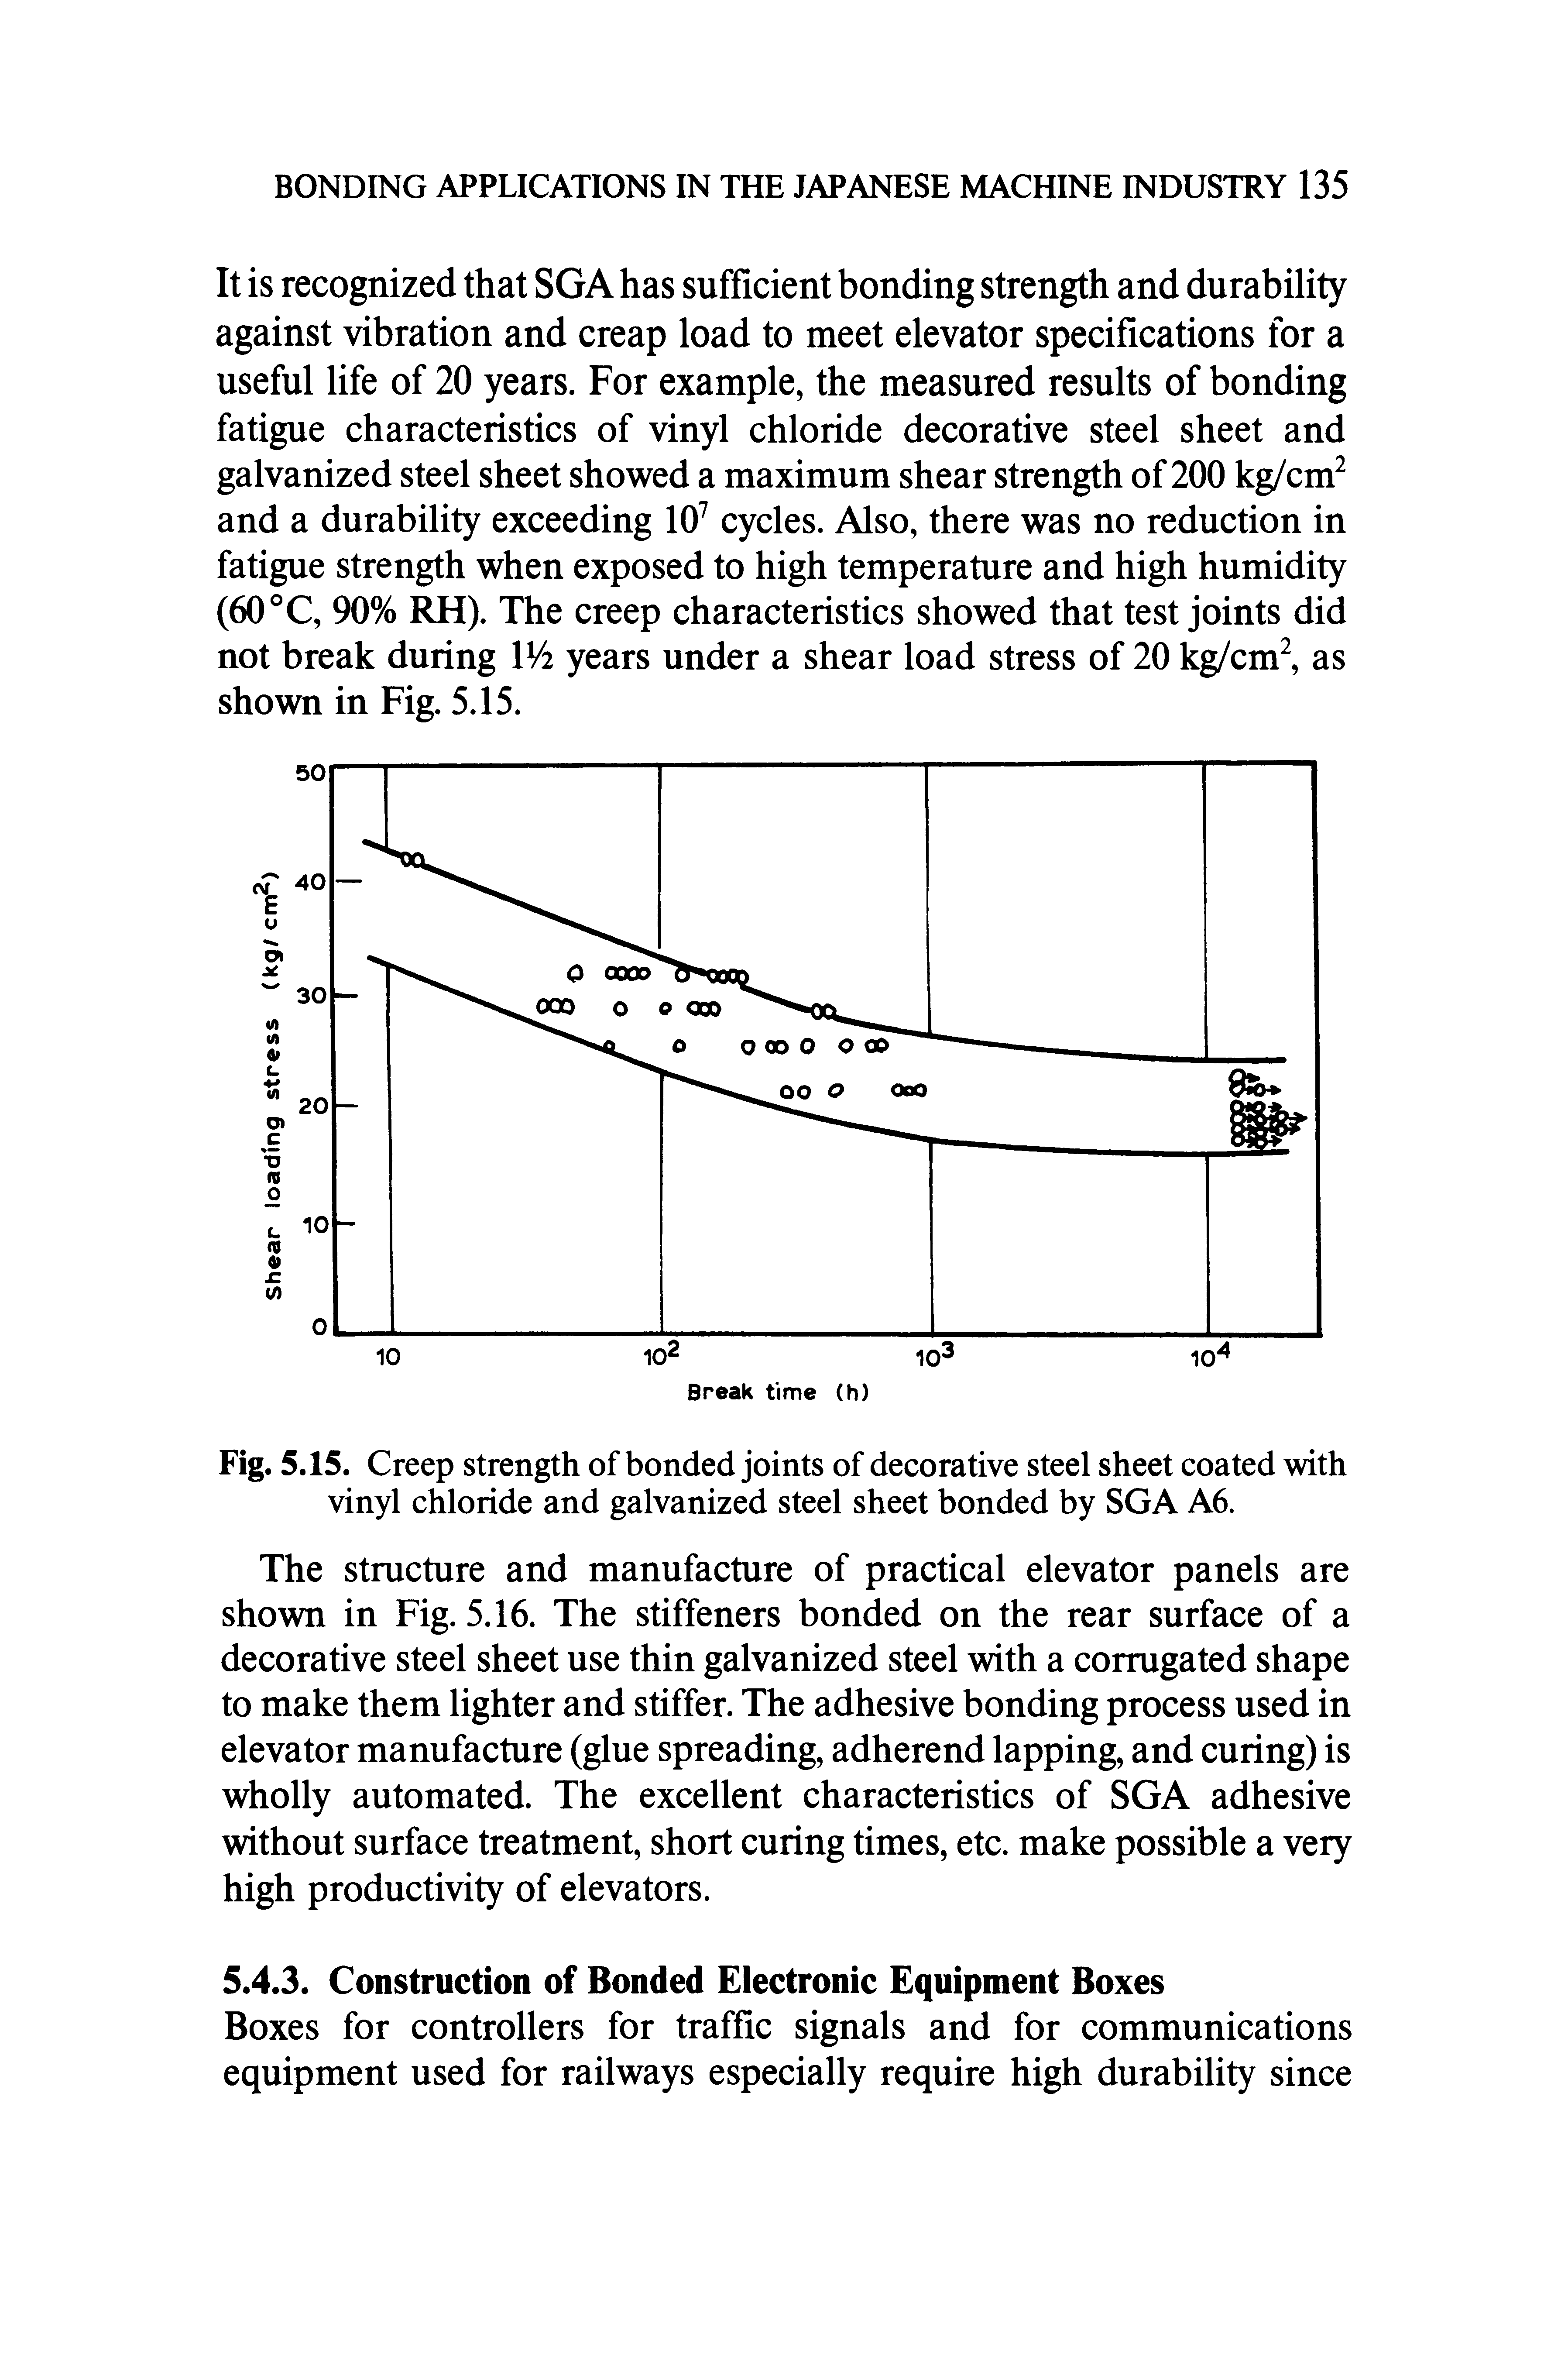 Fig. 5.15. Creep strength of bonded joints of decorative steel sheet coated with vinyl chloride and galvanized steel sheet bonded by SGA A6.